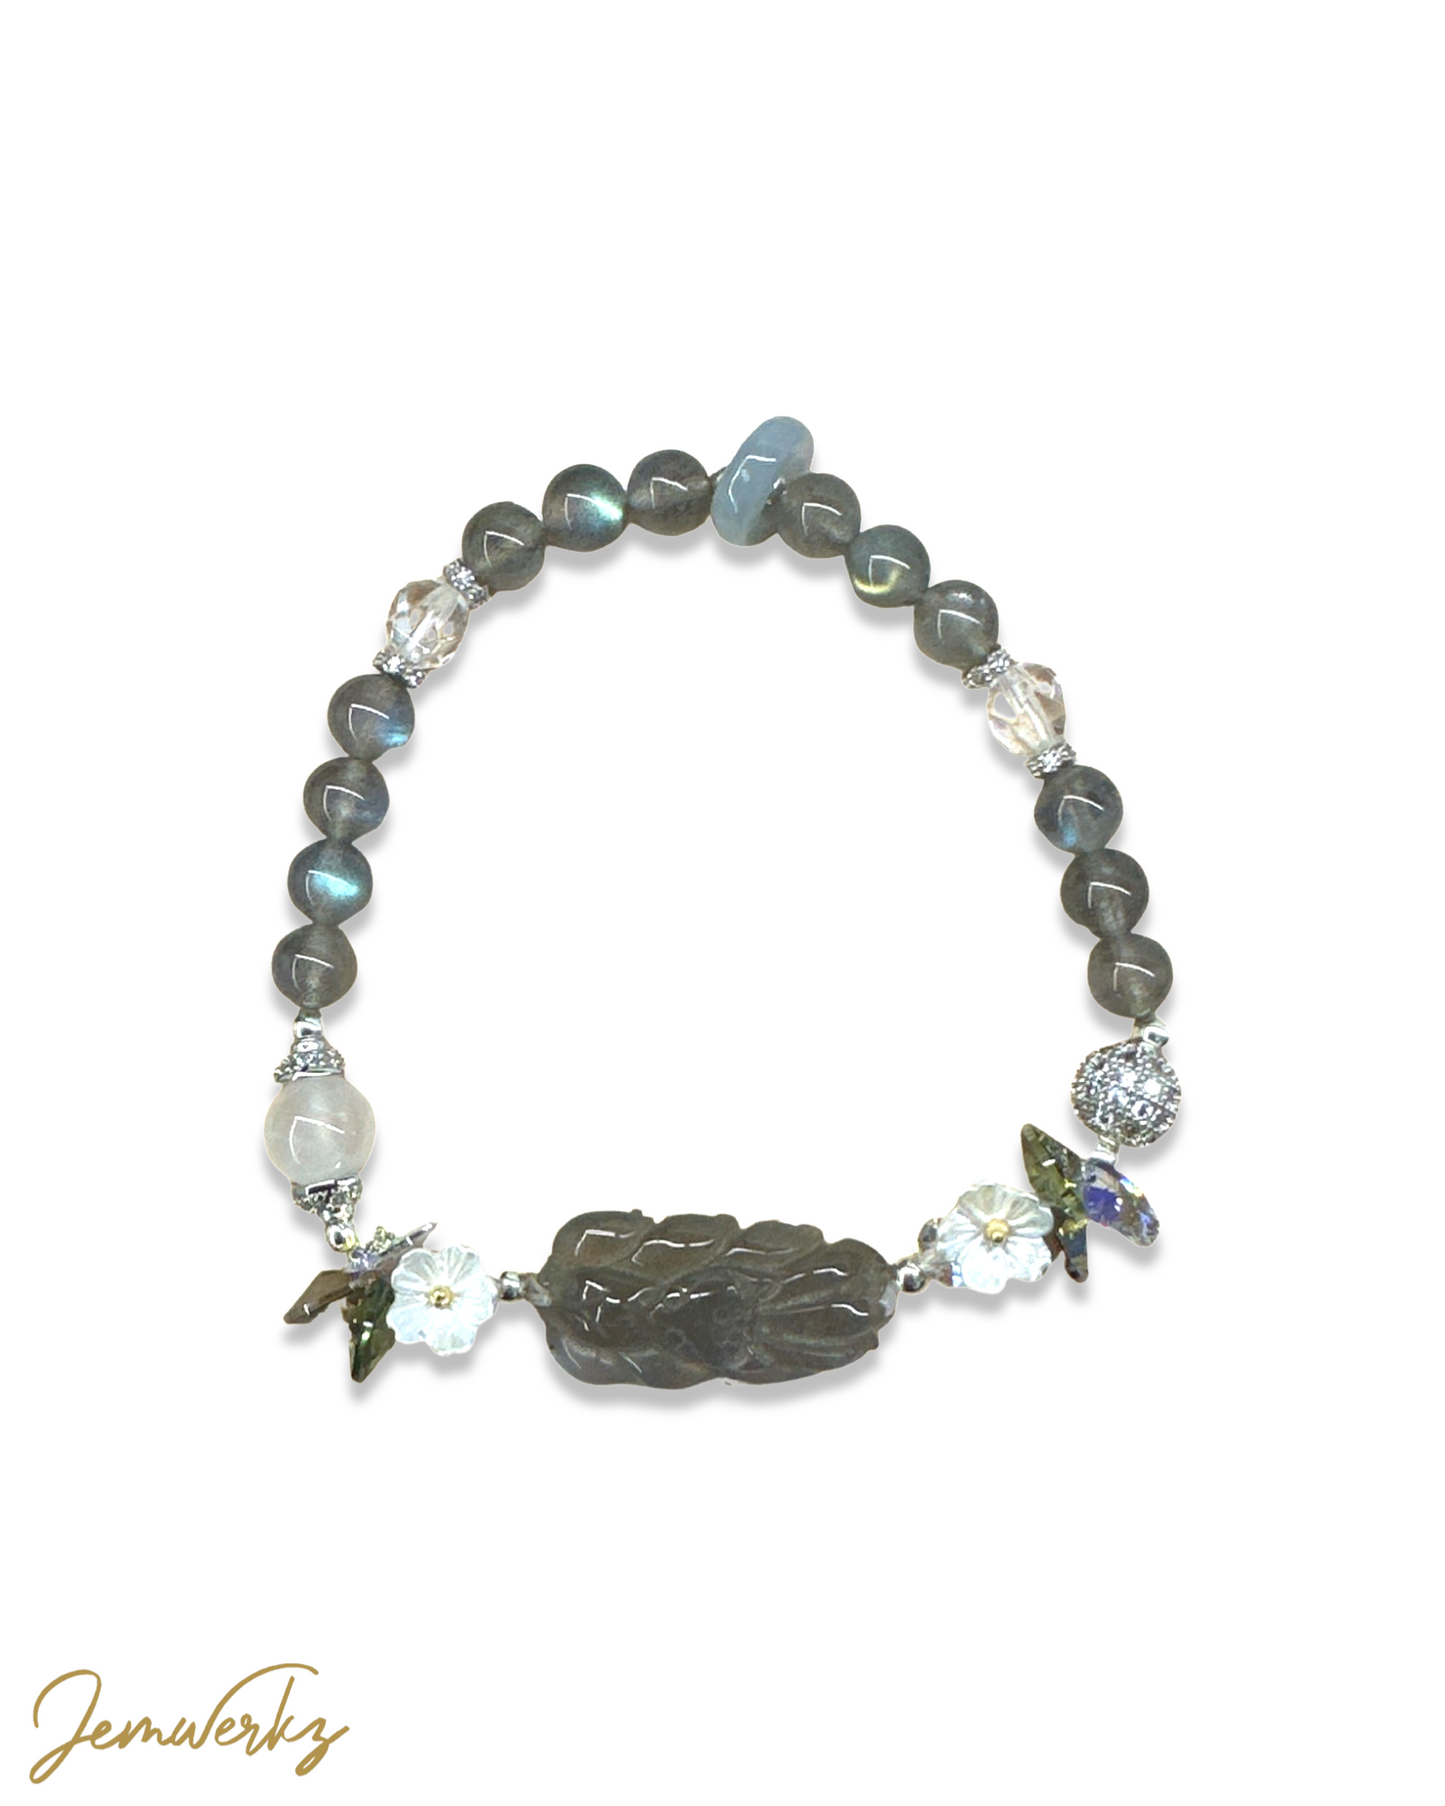 LENNOX FOX - Labradorite 9-tailed Fox with Moonstone, Faceted Clear Quartz, Pearl Shell Flower, Jade Ring and Swarovski Crystals Bracelet